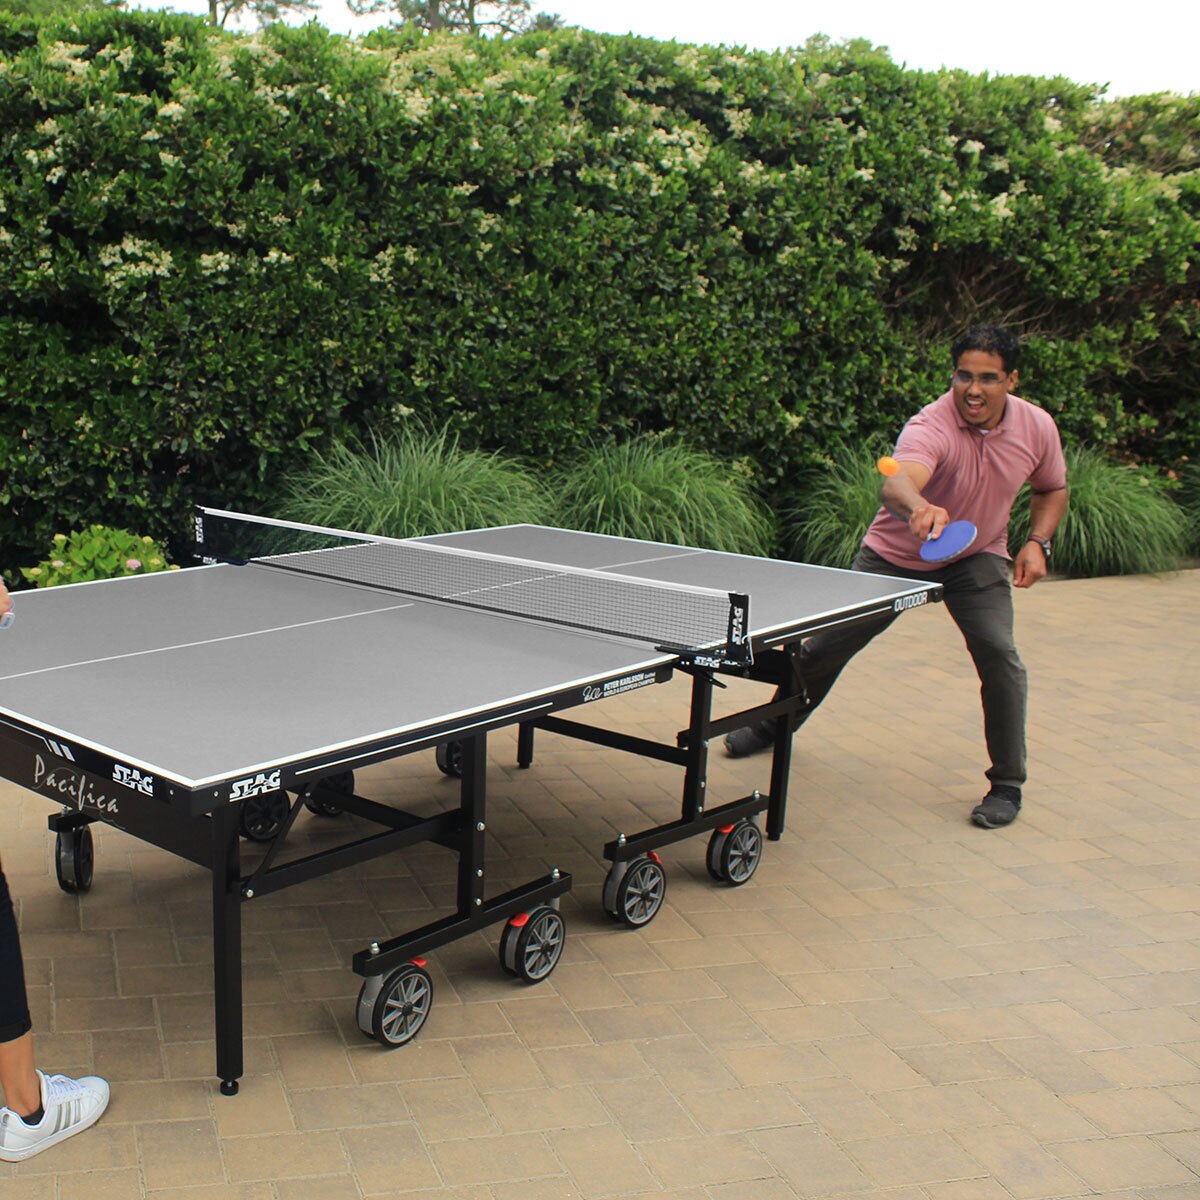 Stag Pacifica OUTDOOR Table Tennis With Rackets, Balls And